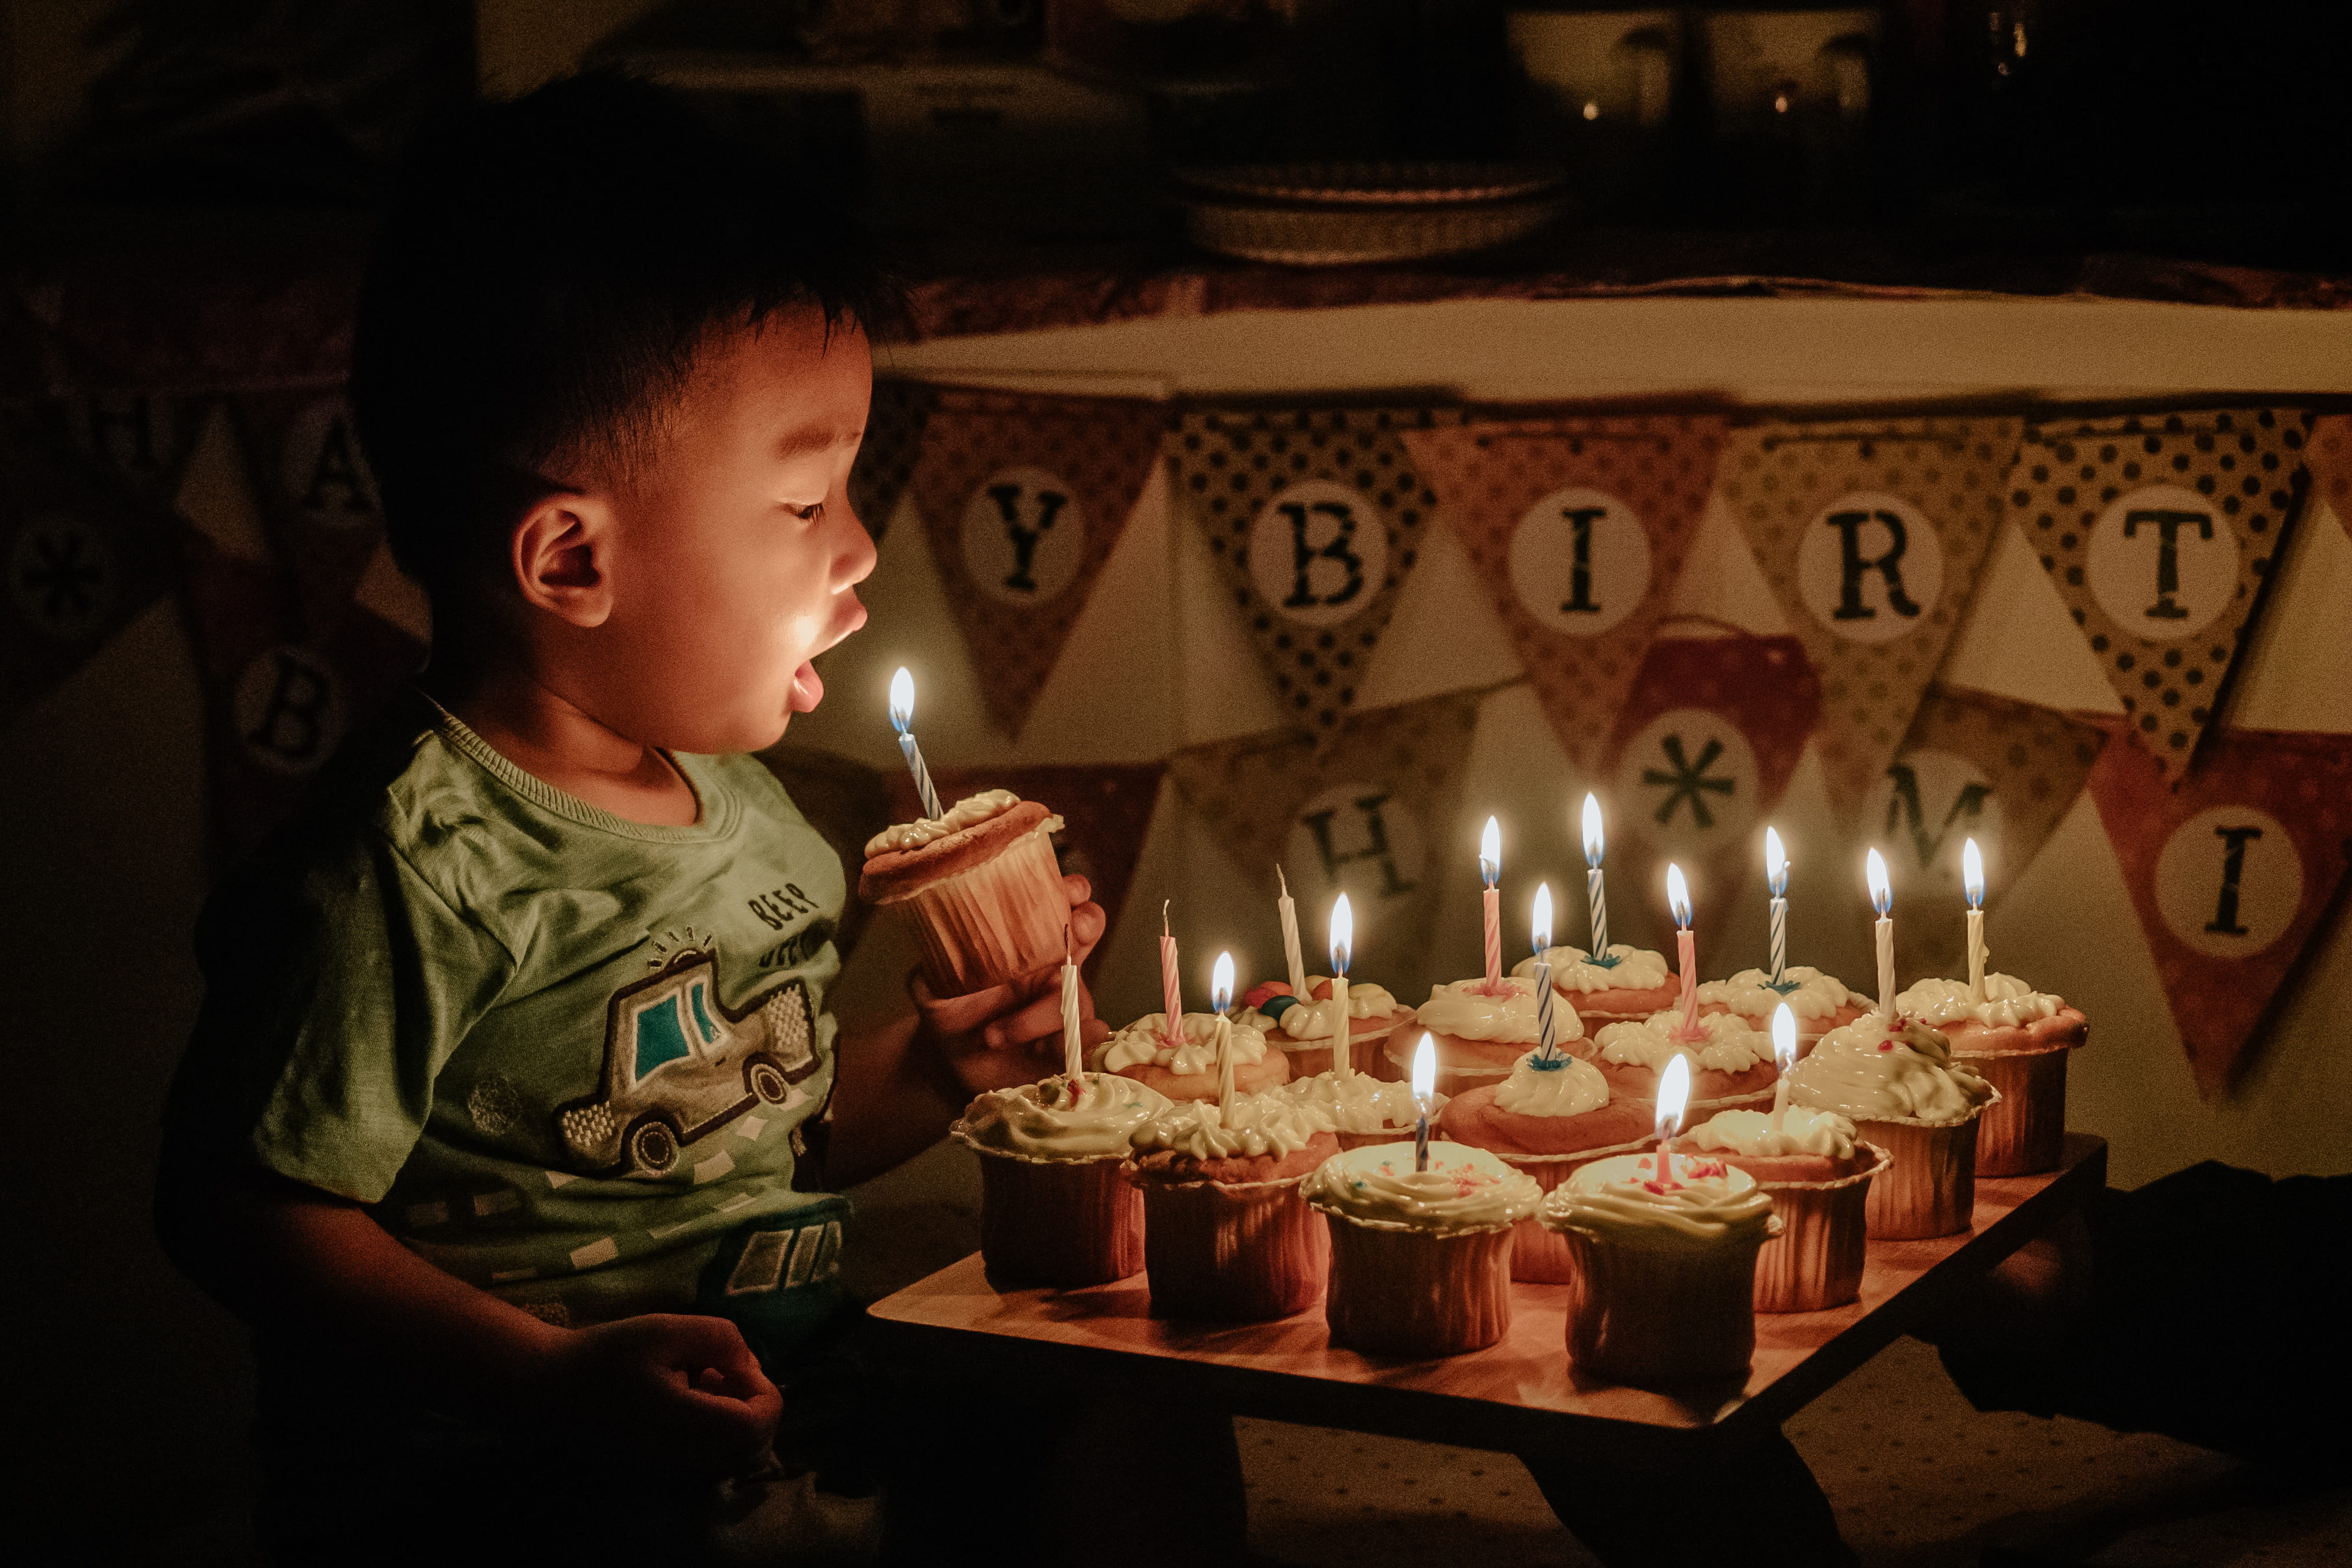 boy holding cupcake blowing the candle, boy holding cup cake